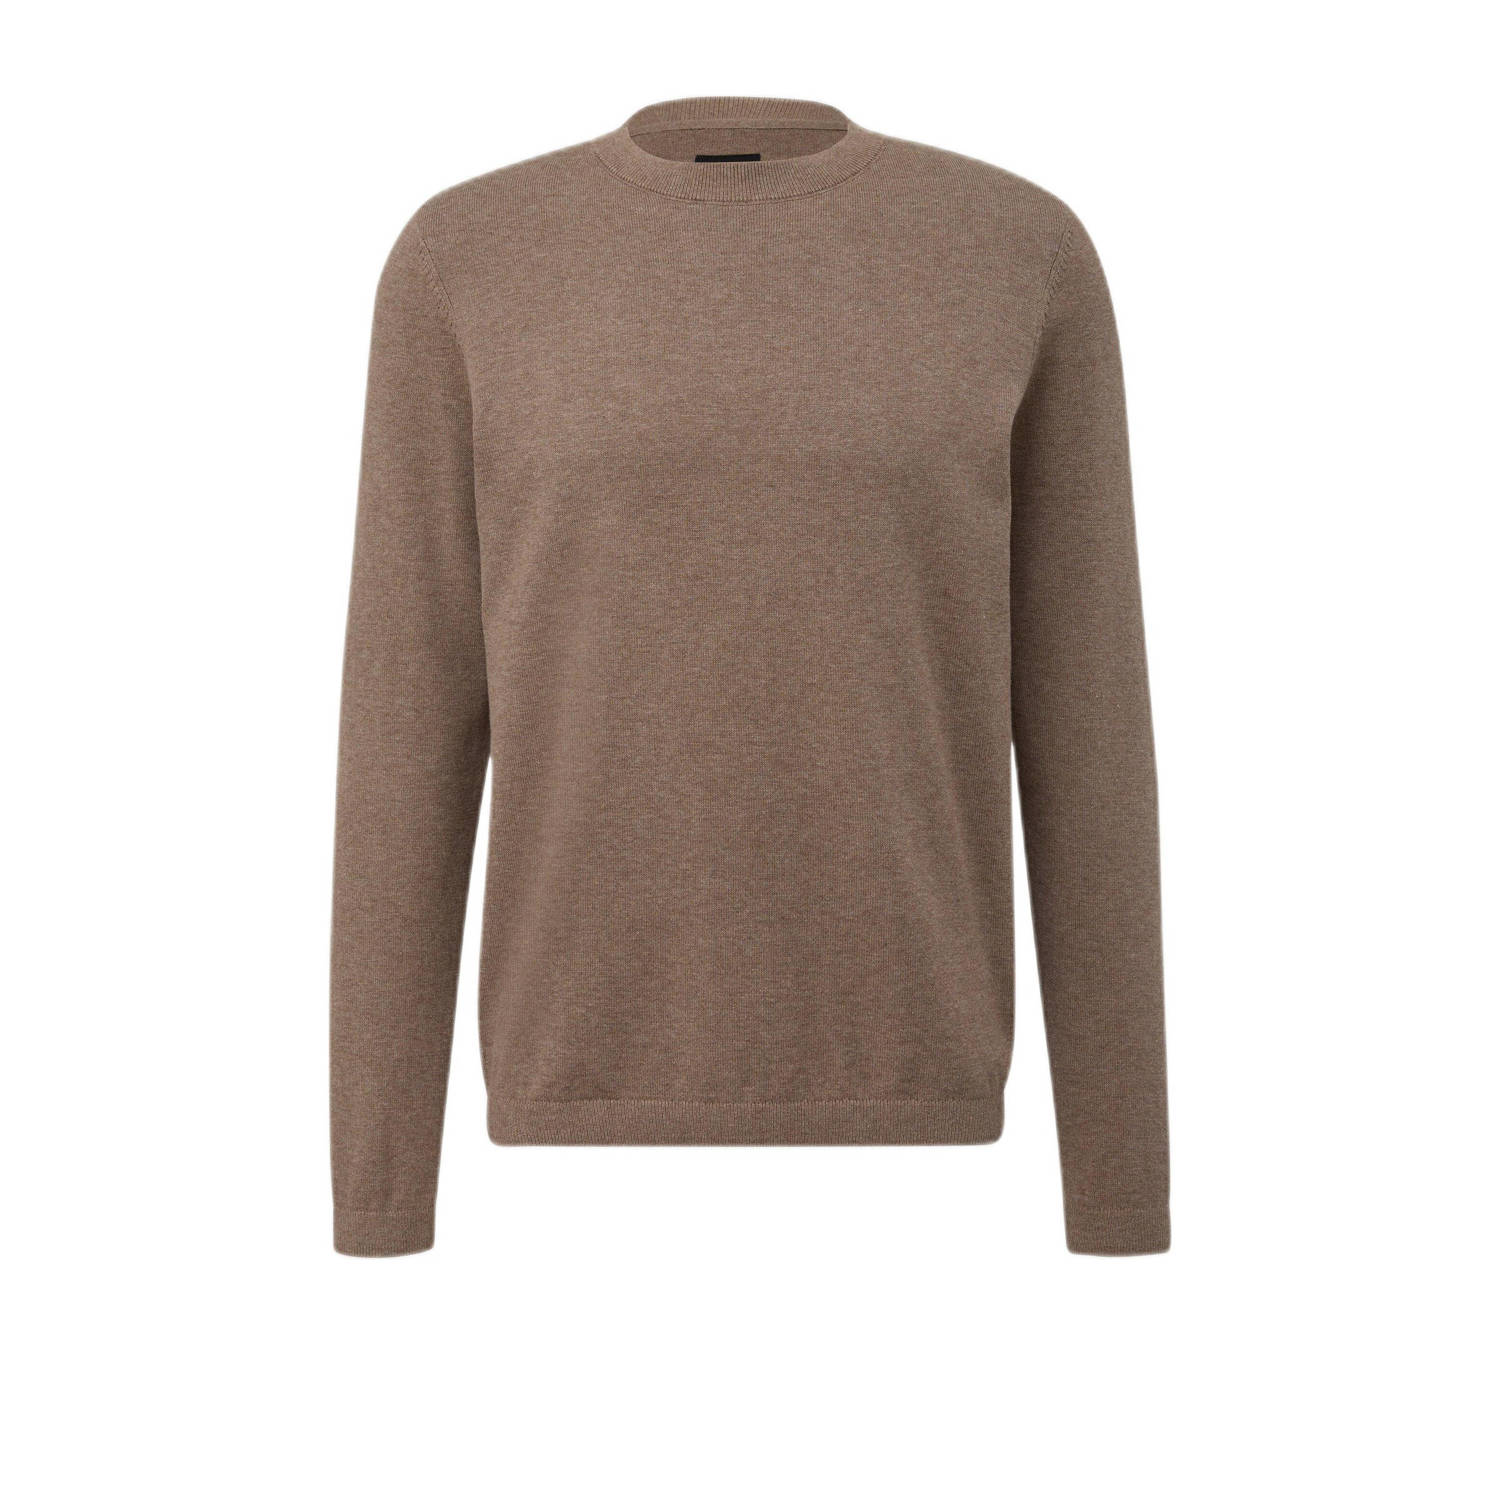 Q S by s.Oliver gemêleerde pullover bruin